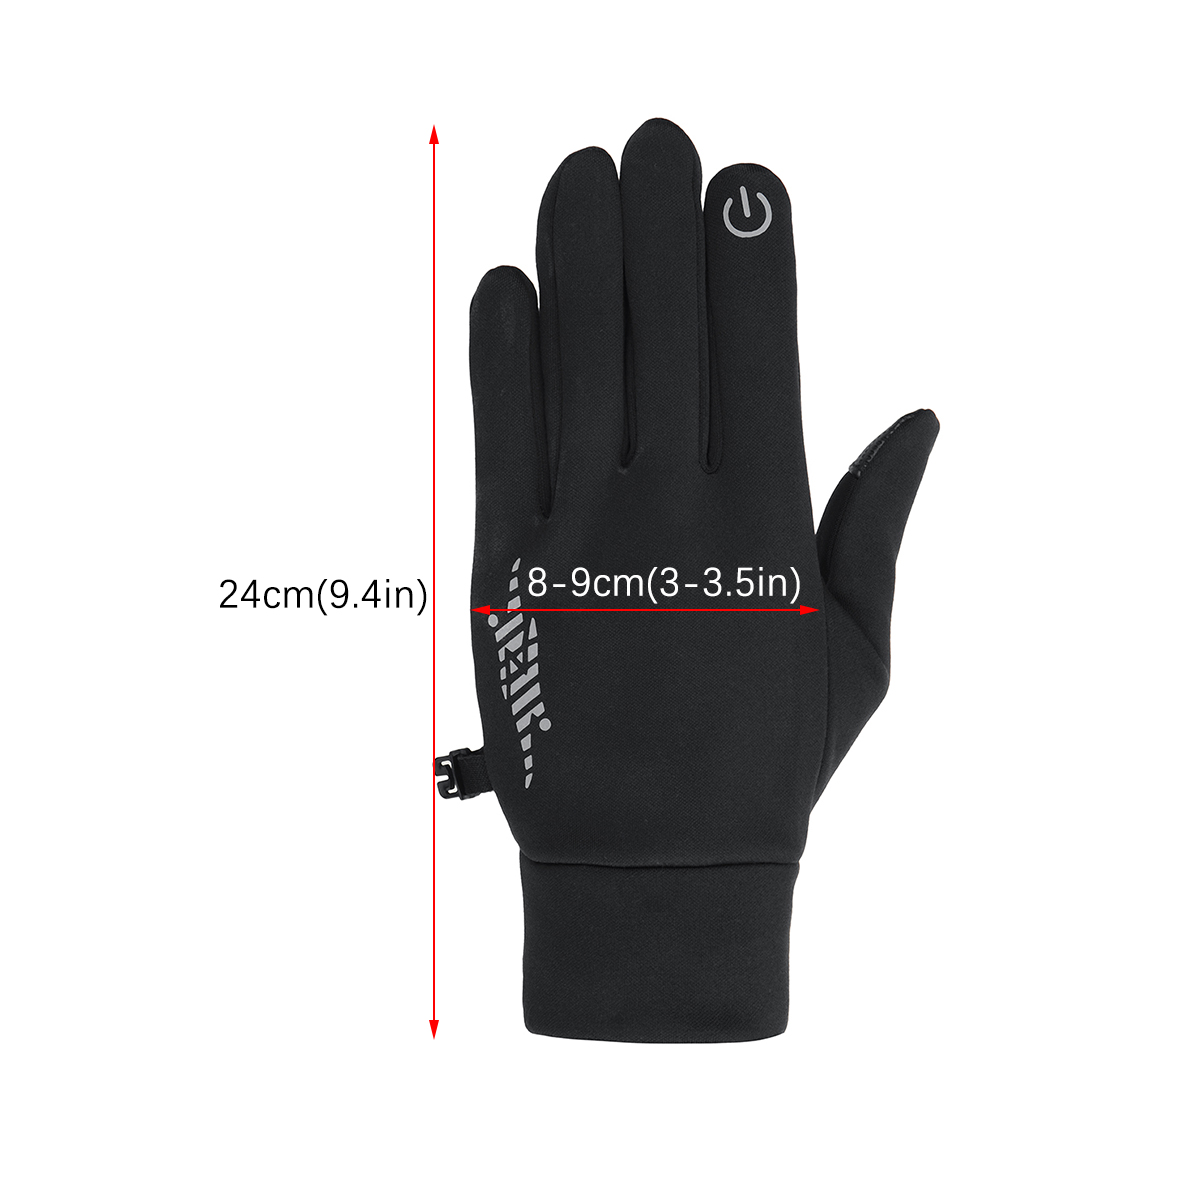 Winter-Warm-Touch-Screen-Thermal-Gloves-Ski-Snow-Snowboard-Cycling-Waterproof-Windproof-Gloves-1923176-9